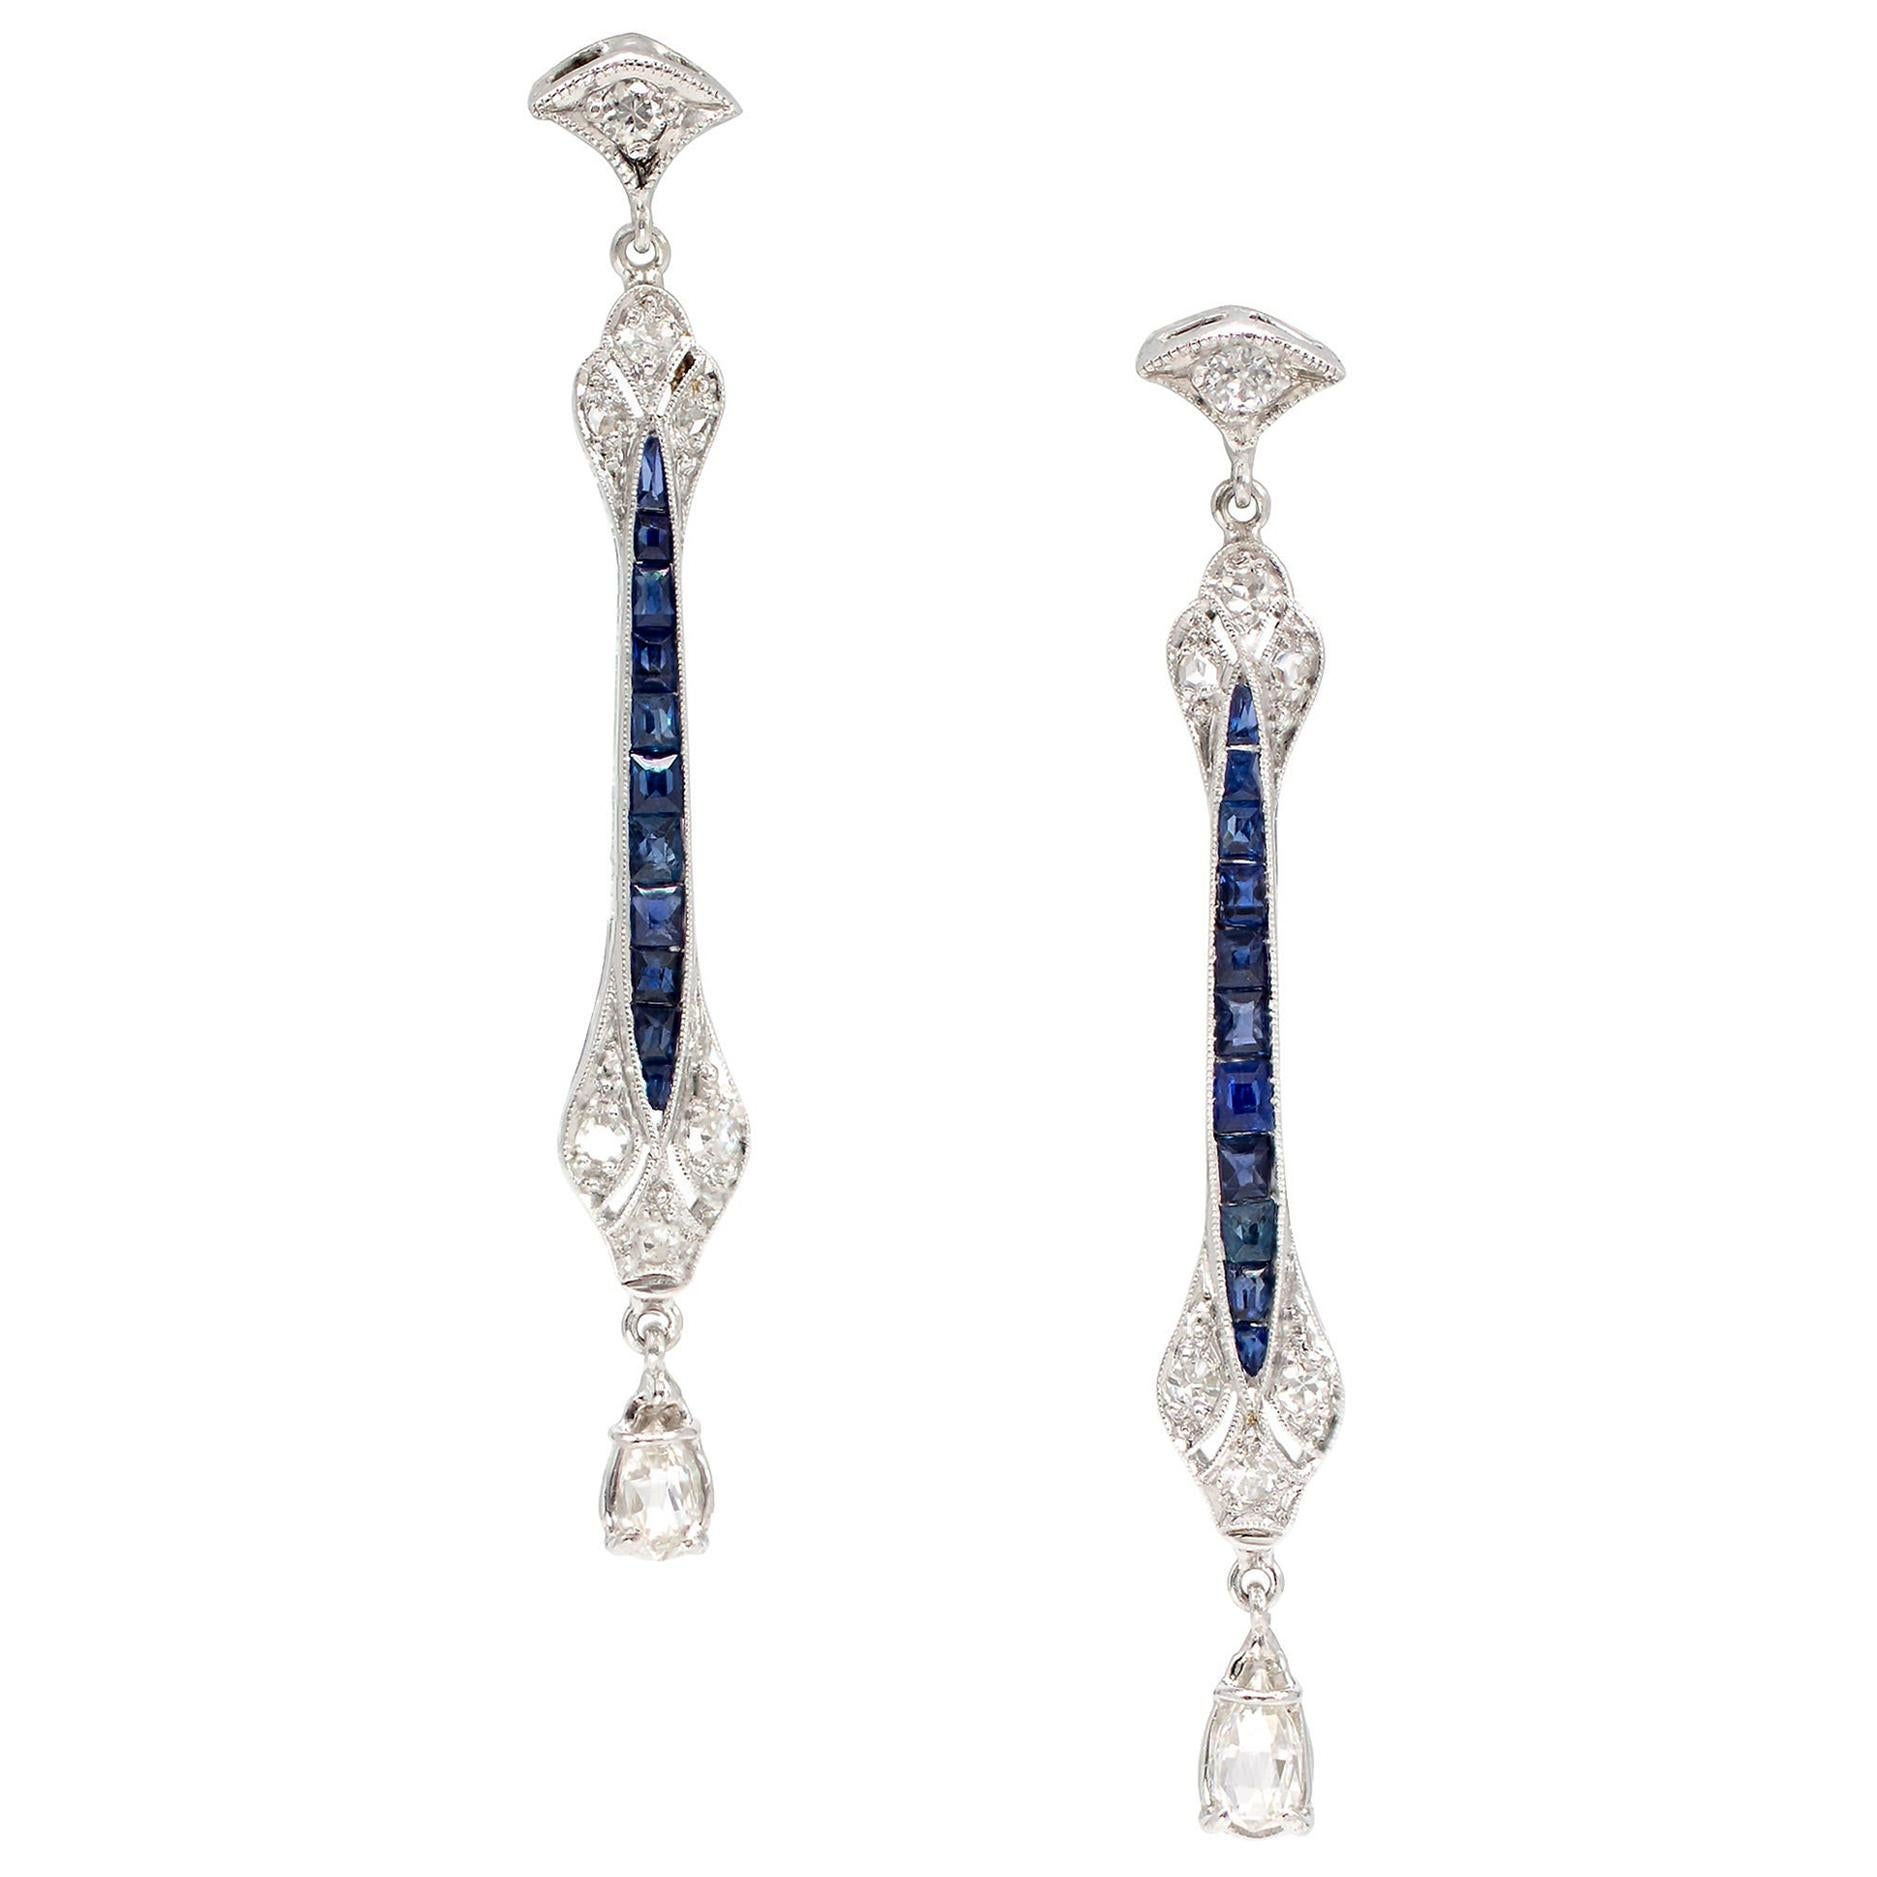 Antique French Cut Sapphires and Diamond Earrings Set in Platinum